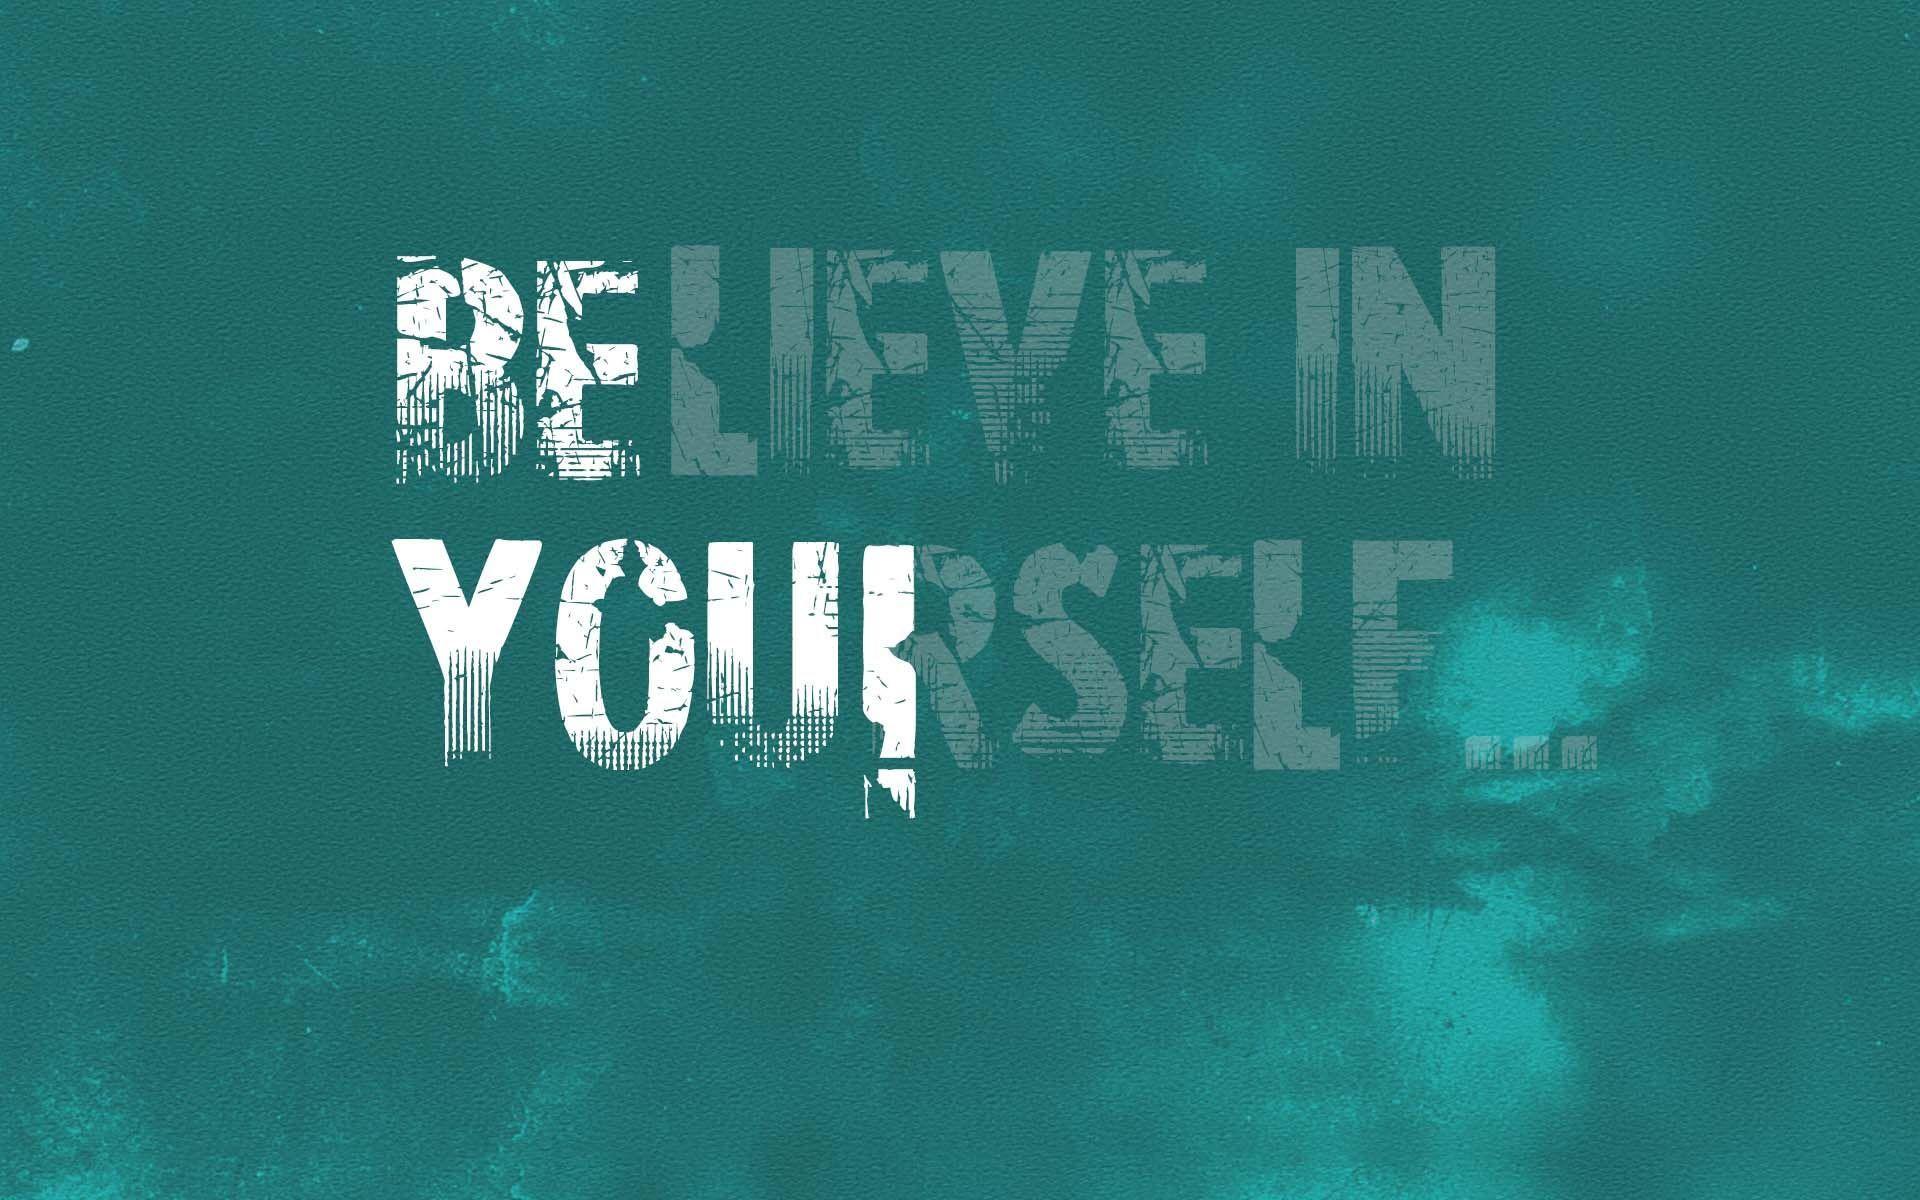 Believe In Yourself. HD Motivation Wallpaper for Mobile and Desktop